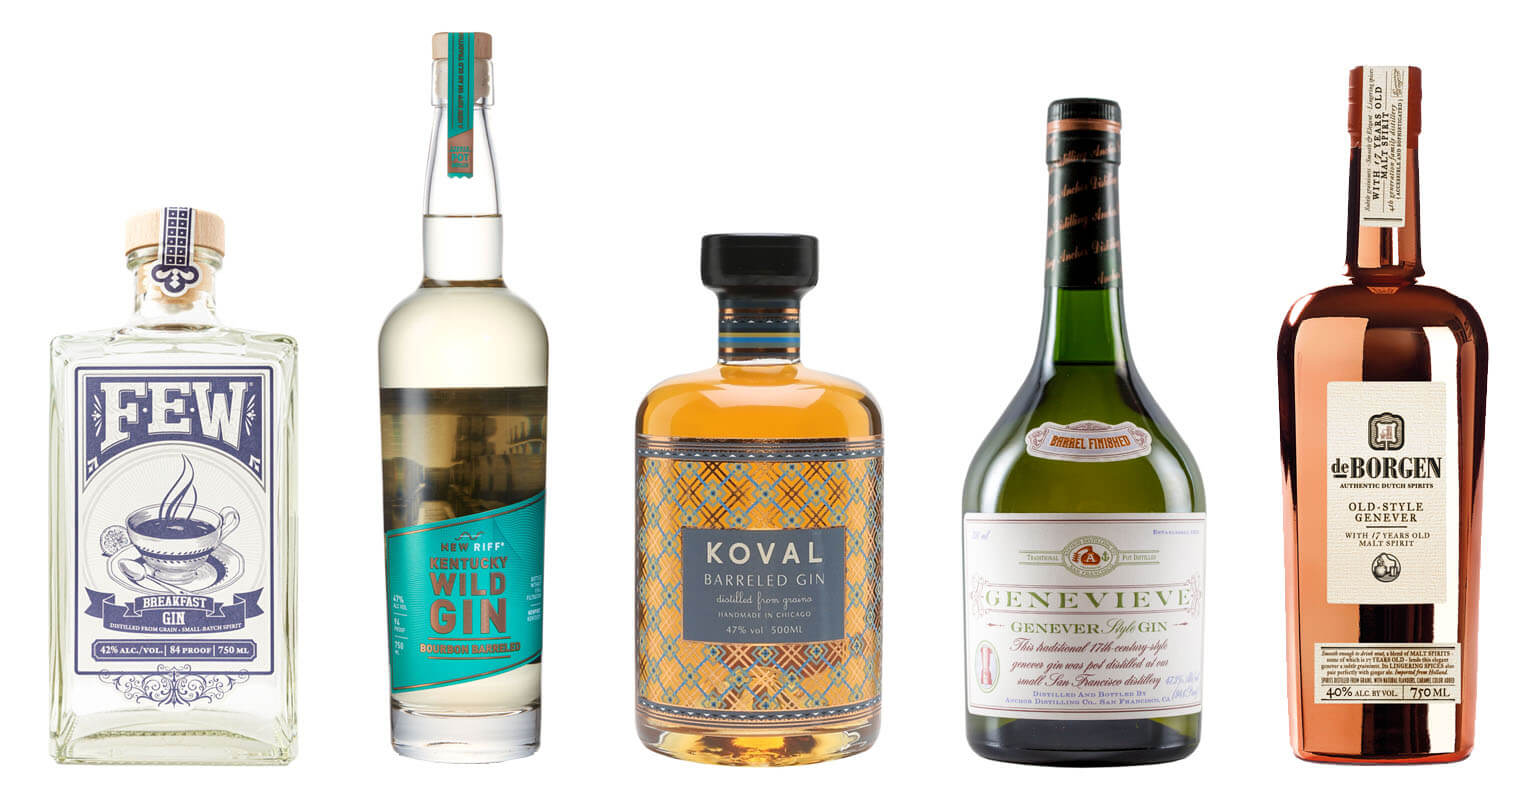 Barrel-Aged Gins And Genevers, bottles on white, featured image